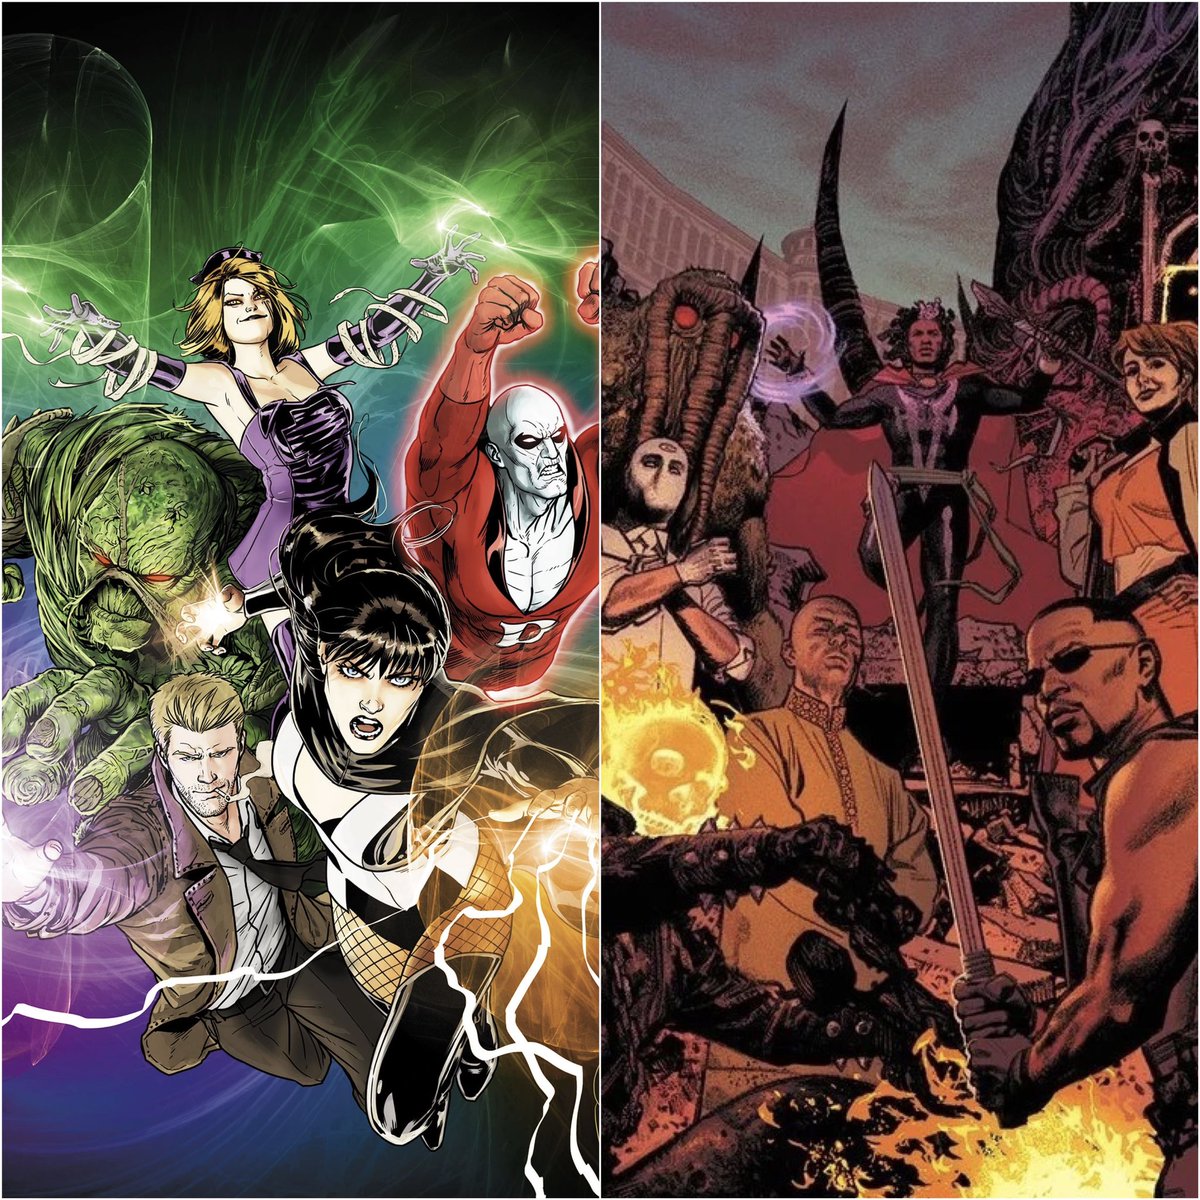 #Earth7642TeamBuilder
Using 4 DC characters & 5 Marvel characters, build a Midnight Sons team for Earth-7642/The Crossover Earth.